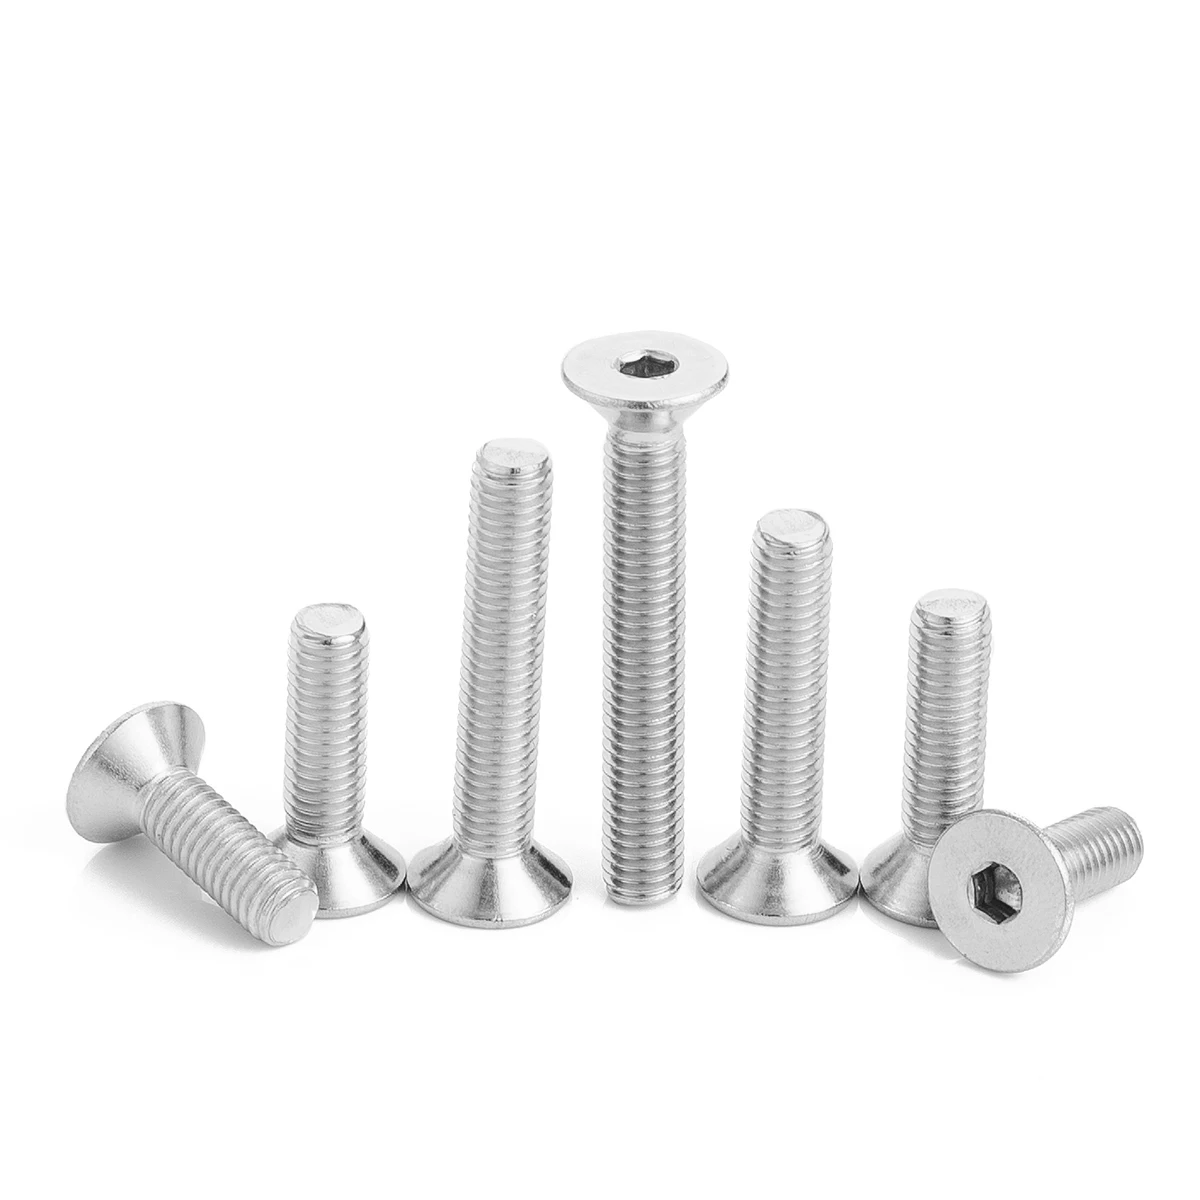 5/5M2 M2.5 M3 M4 M5 M6 M8 M10 304 Stainless Steel Hexagon Hex Socket Countersunk Screw Flat Head Screw Allen Bolts DIN7991  - buy with discount